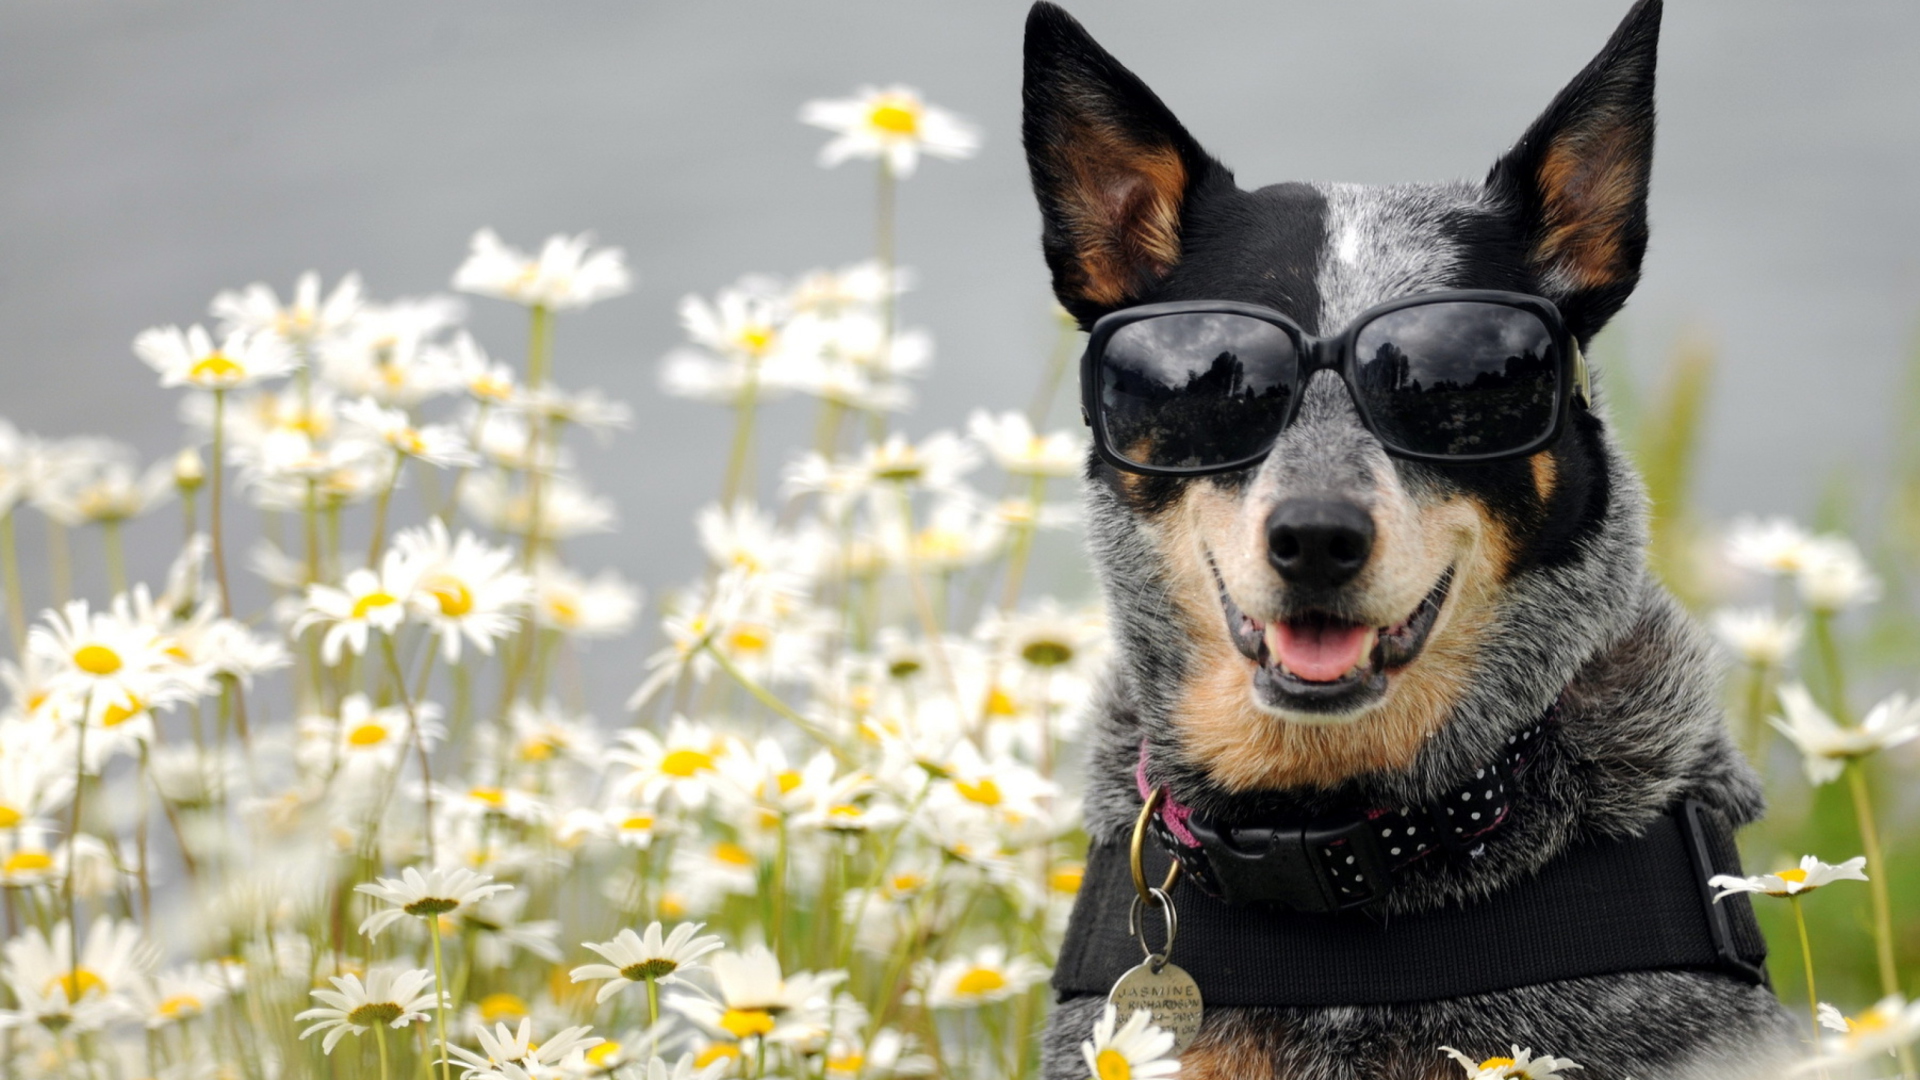 Dog, Sunglasses And Daisies wallpaper 1920x1080